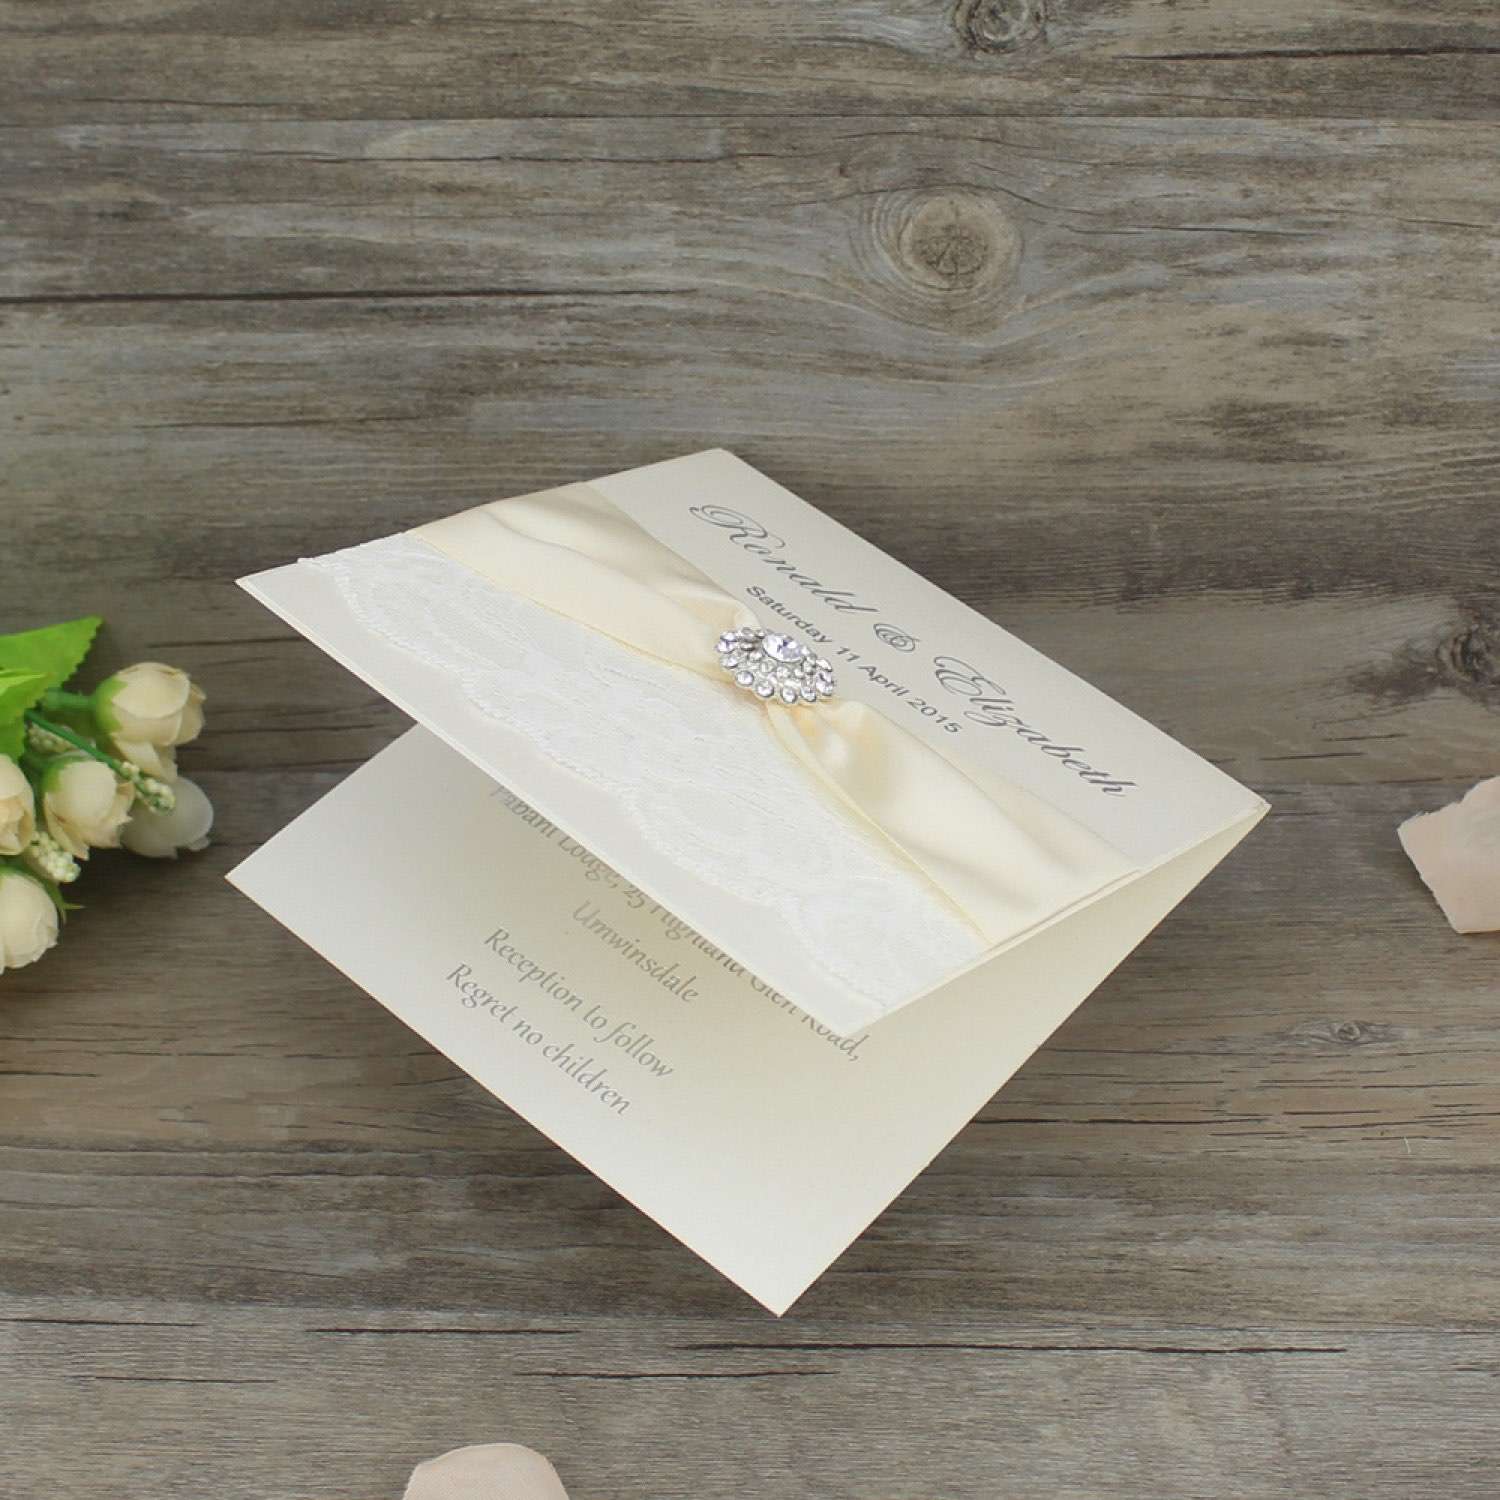 Square Lace Wedding Card with Buckle Decoration Invitation Card Customized 